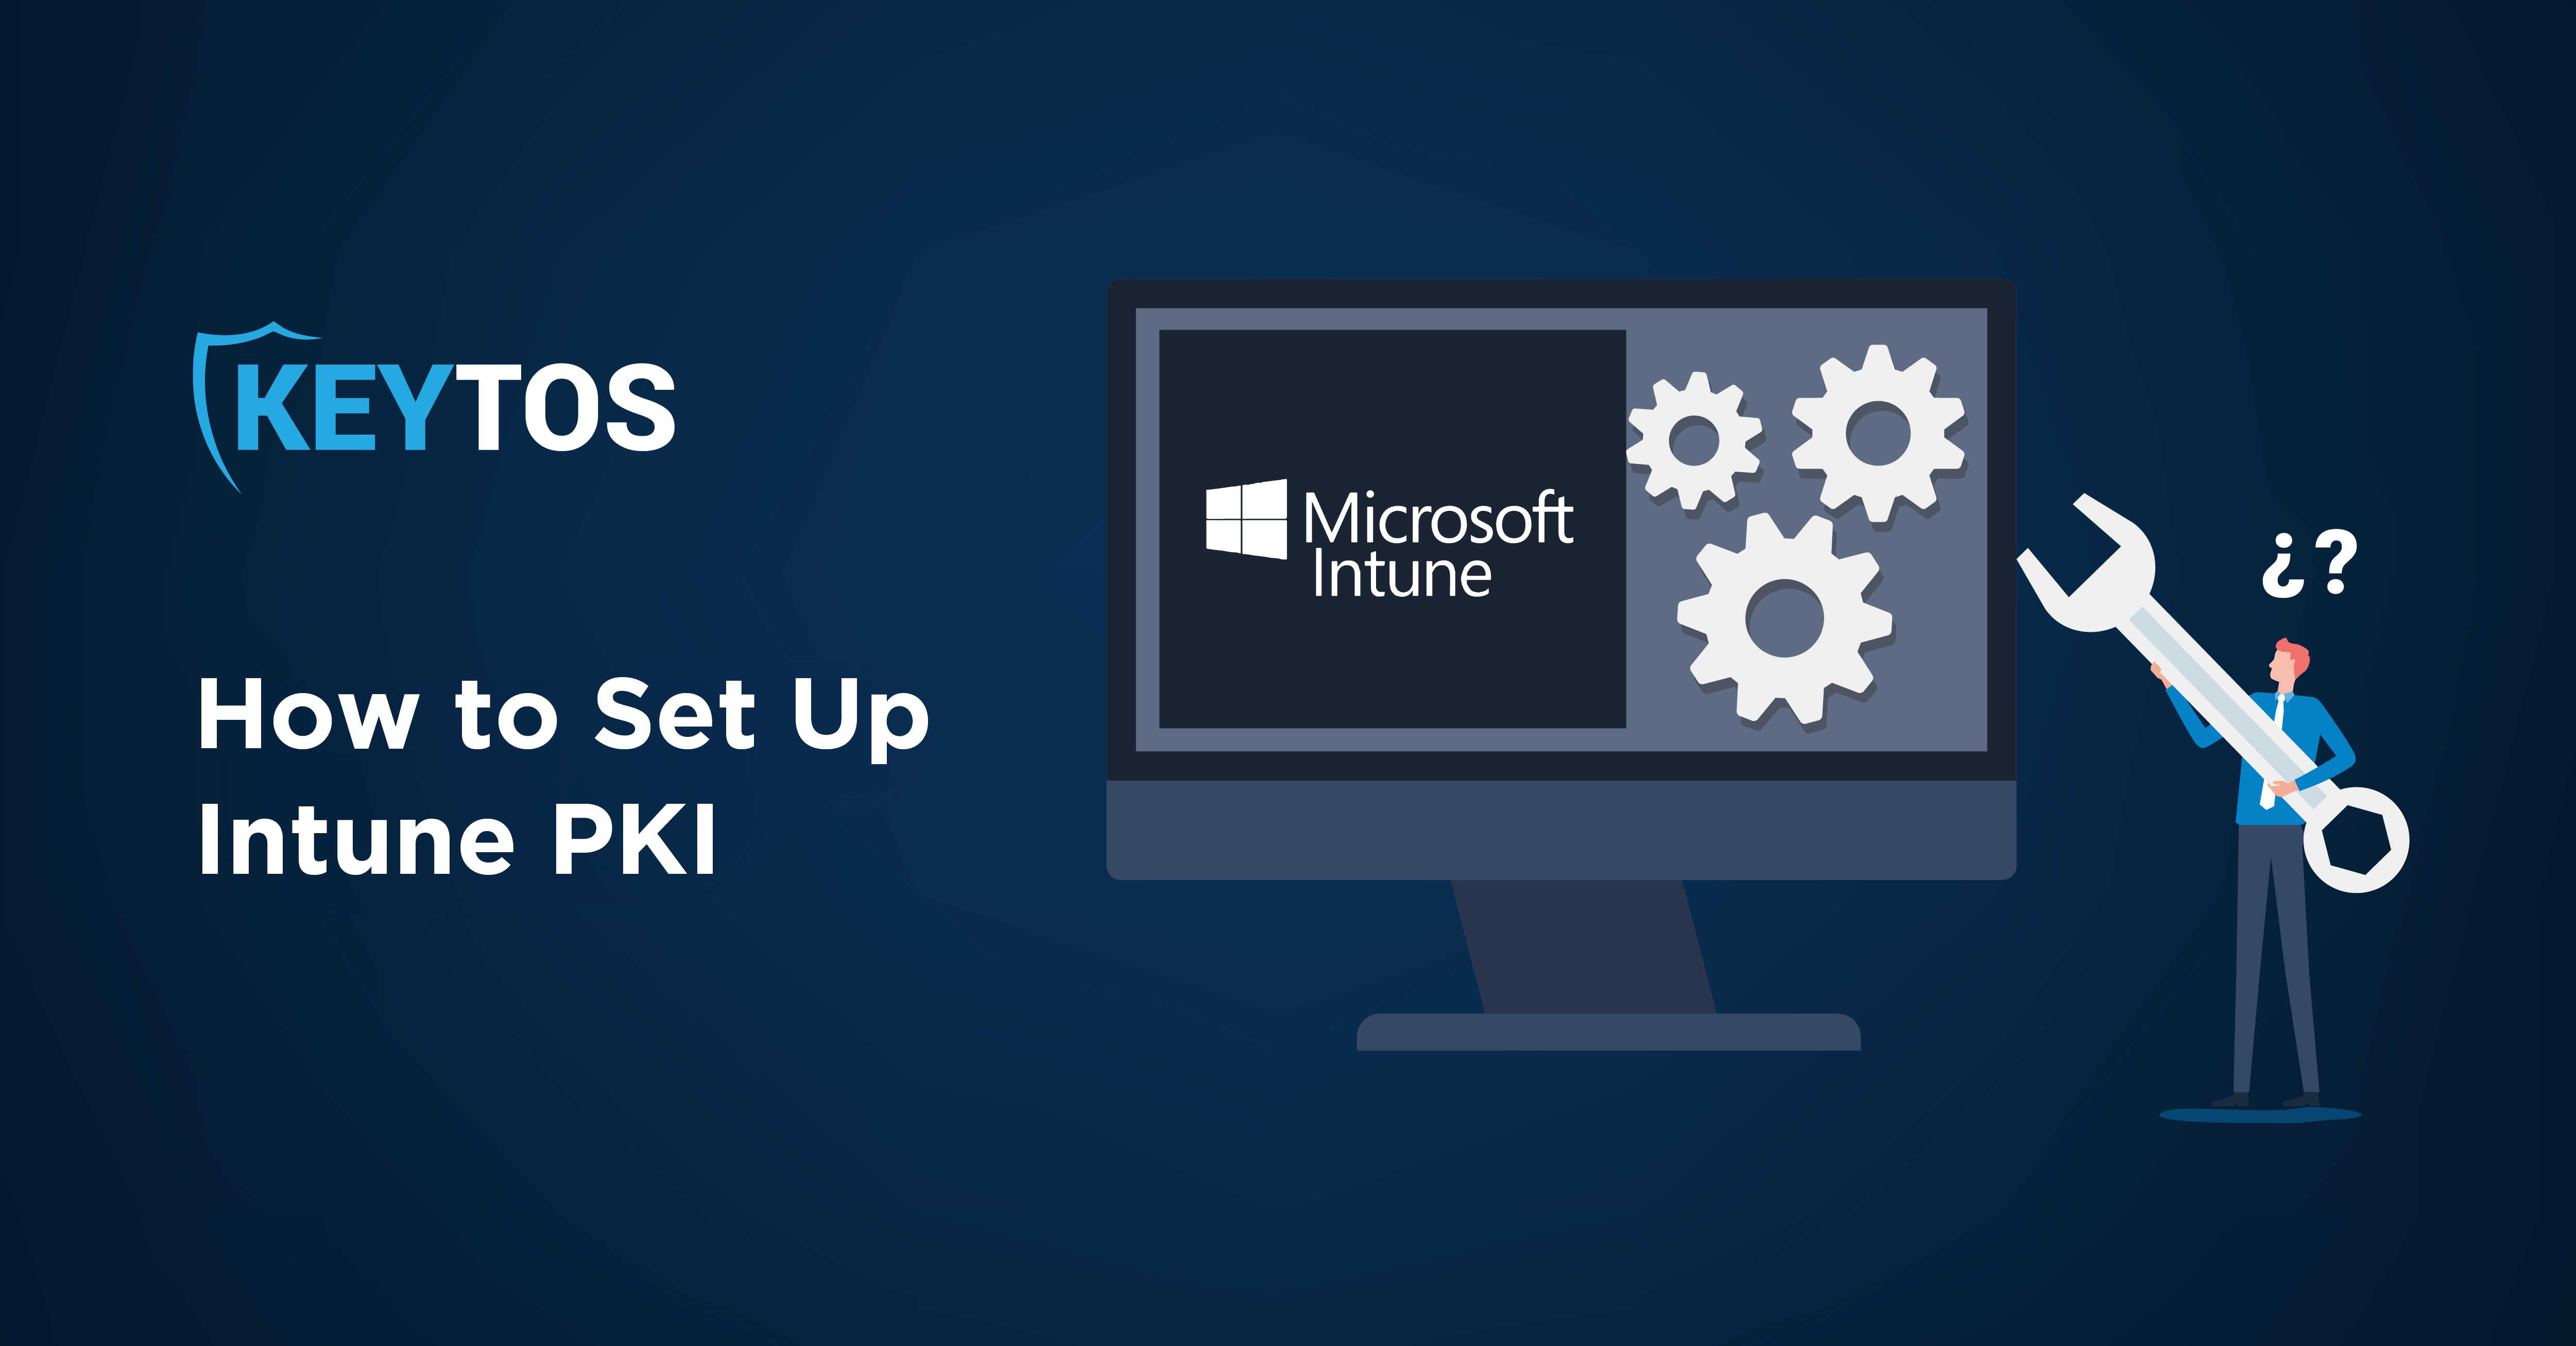 How to Set Up Intune PKI